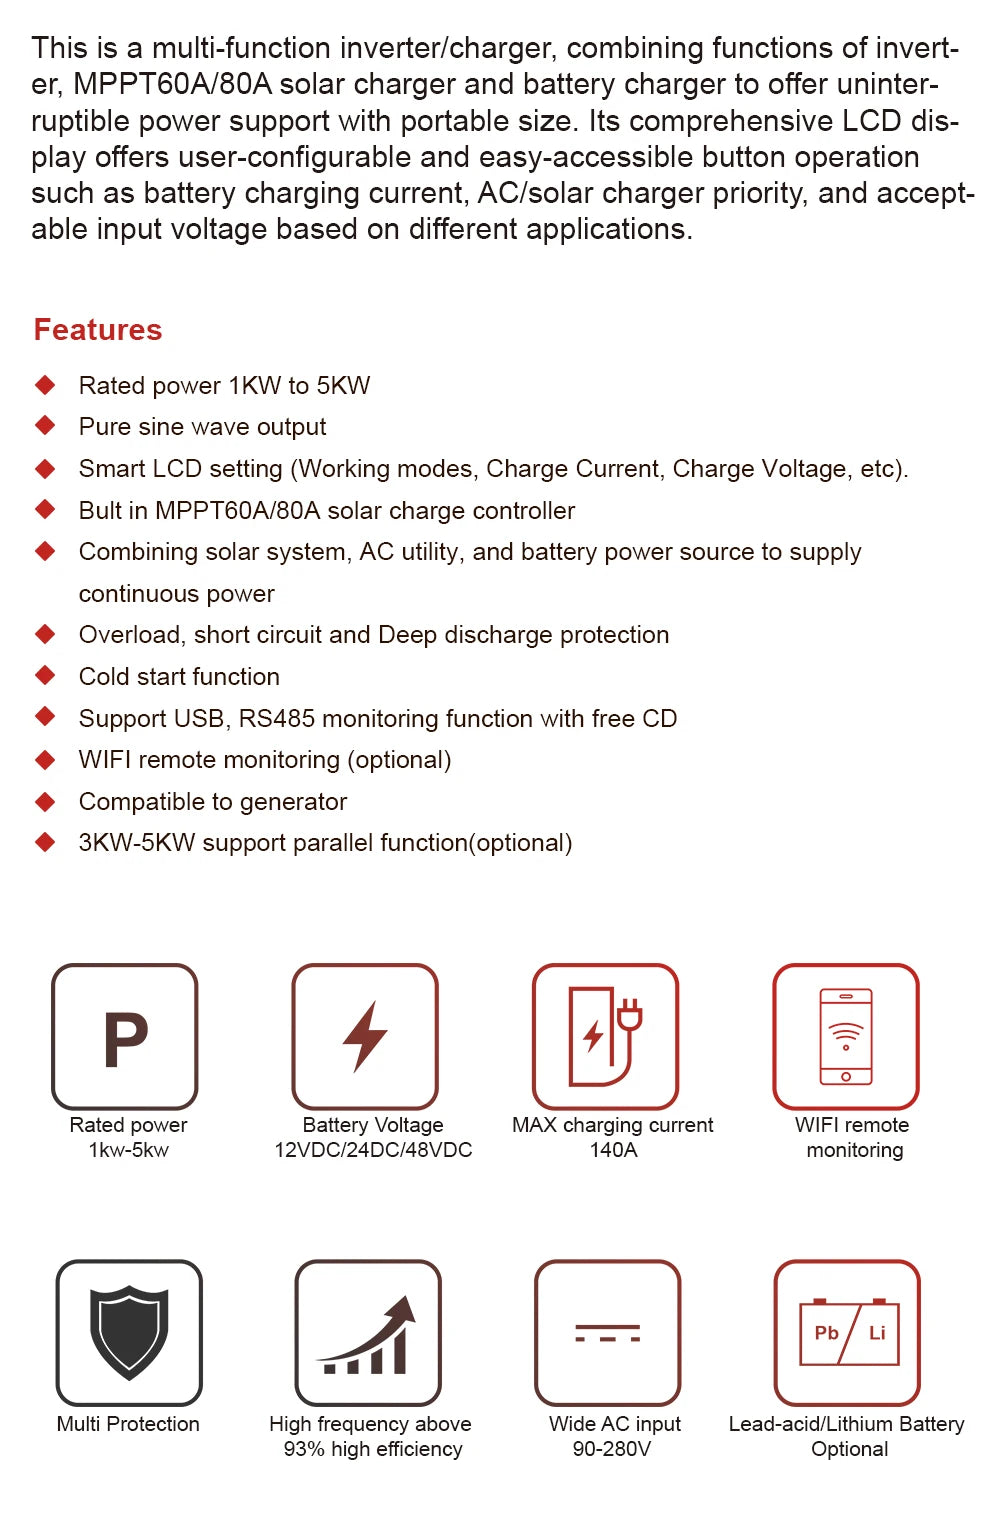 Off-grid solar inverter with MPPT, 24V, 3kW capacity, and WiFi connectivity for hybrid power management.